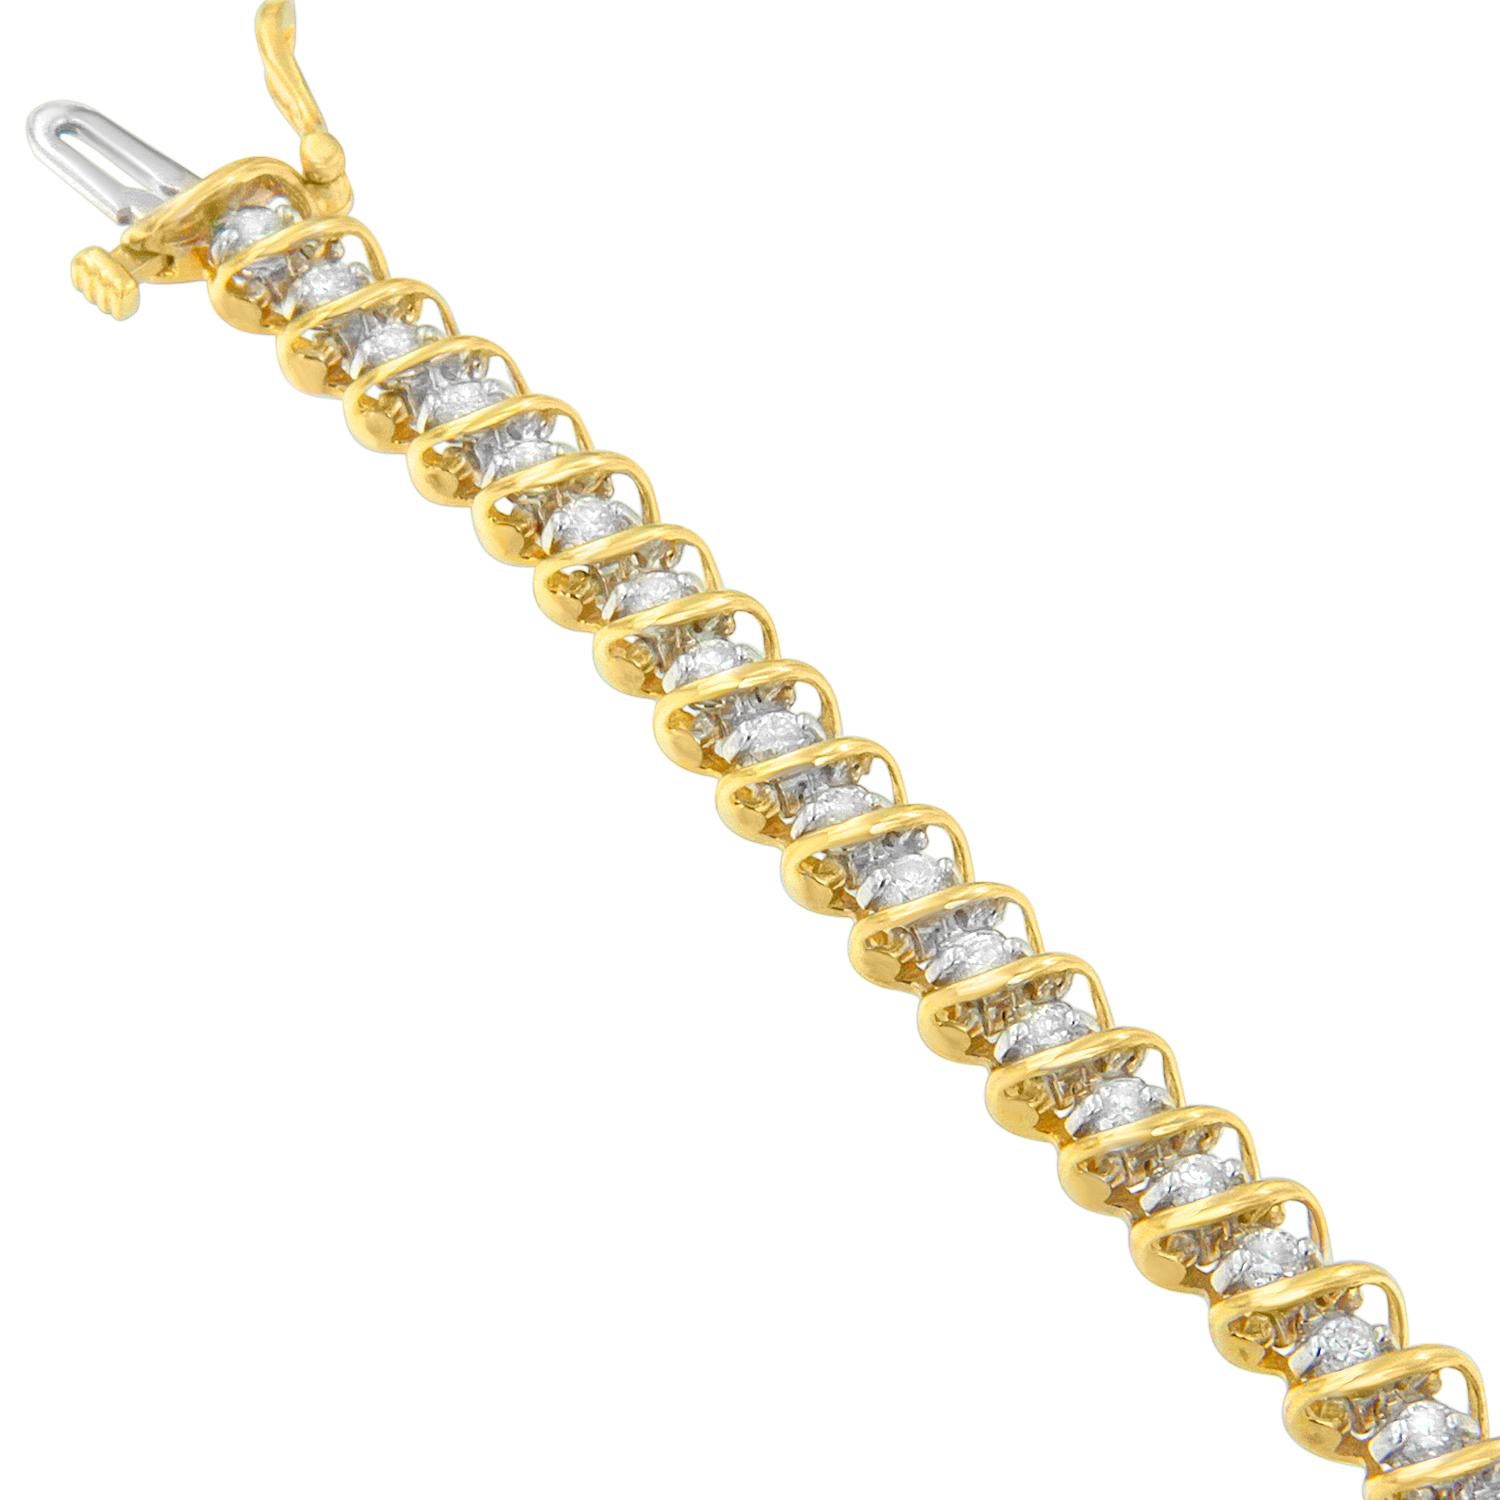 Adorn your wrist with this gorgeous bracelet that never goes unnoticed. Features 3 carats of sparkling round diamonds, intricately wrapped in 18 karat yellow gold for an unforgettable presentation. Comes with 42 round-cut diamonds set in beautiful